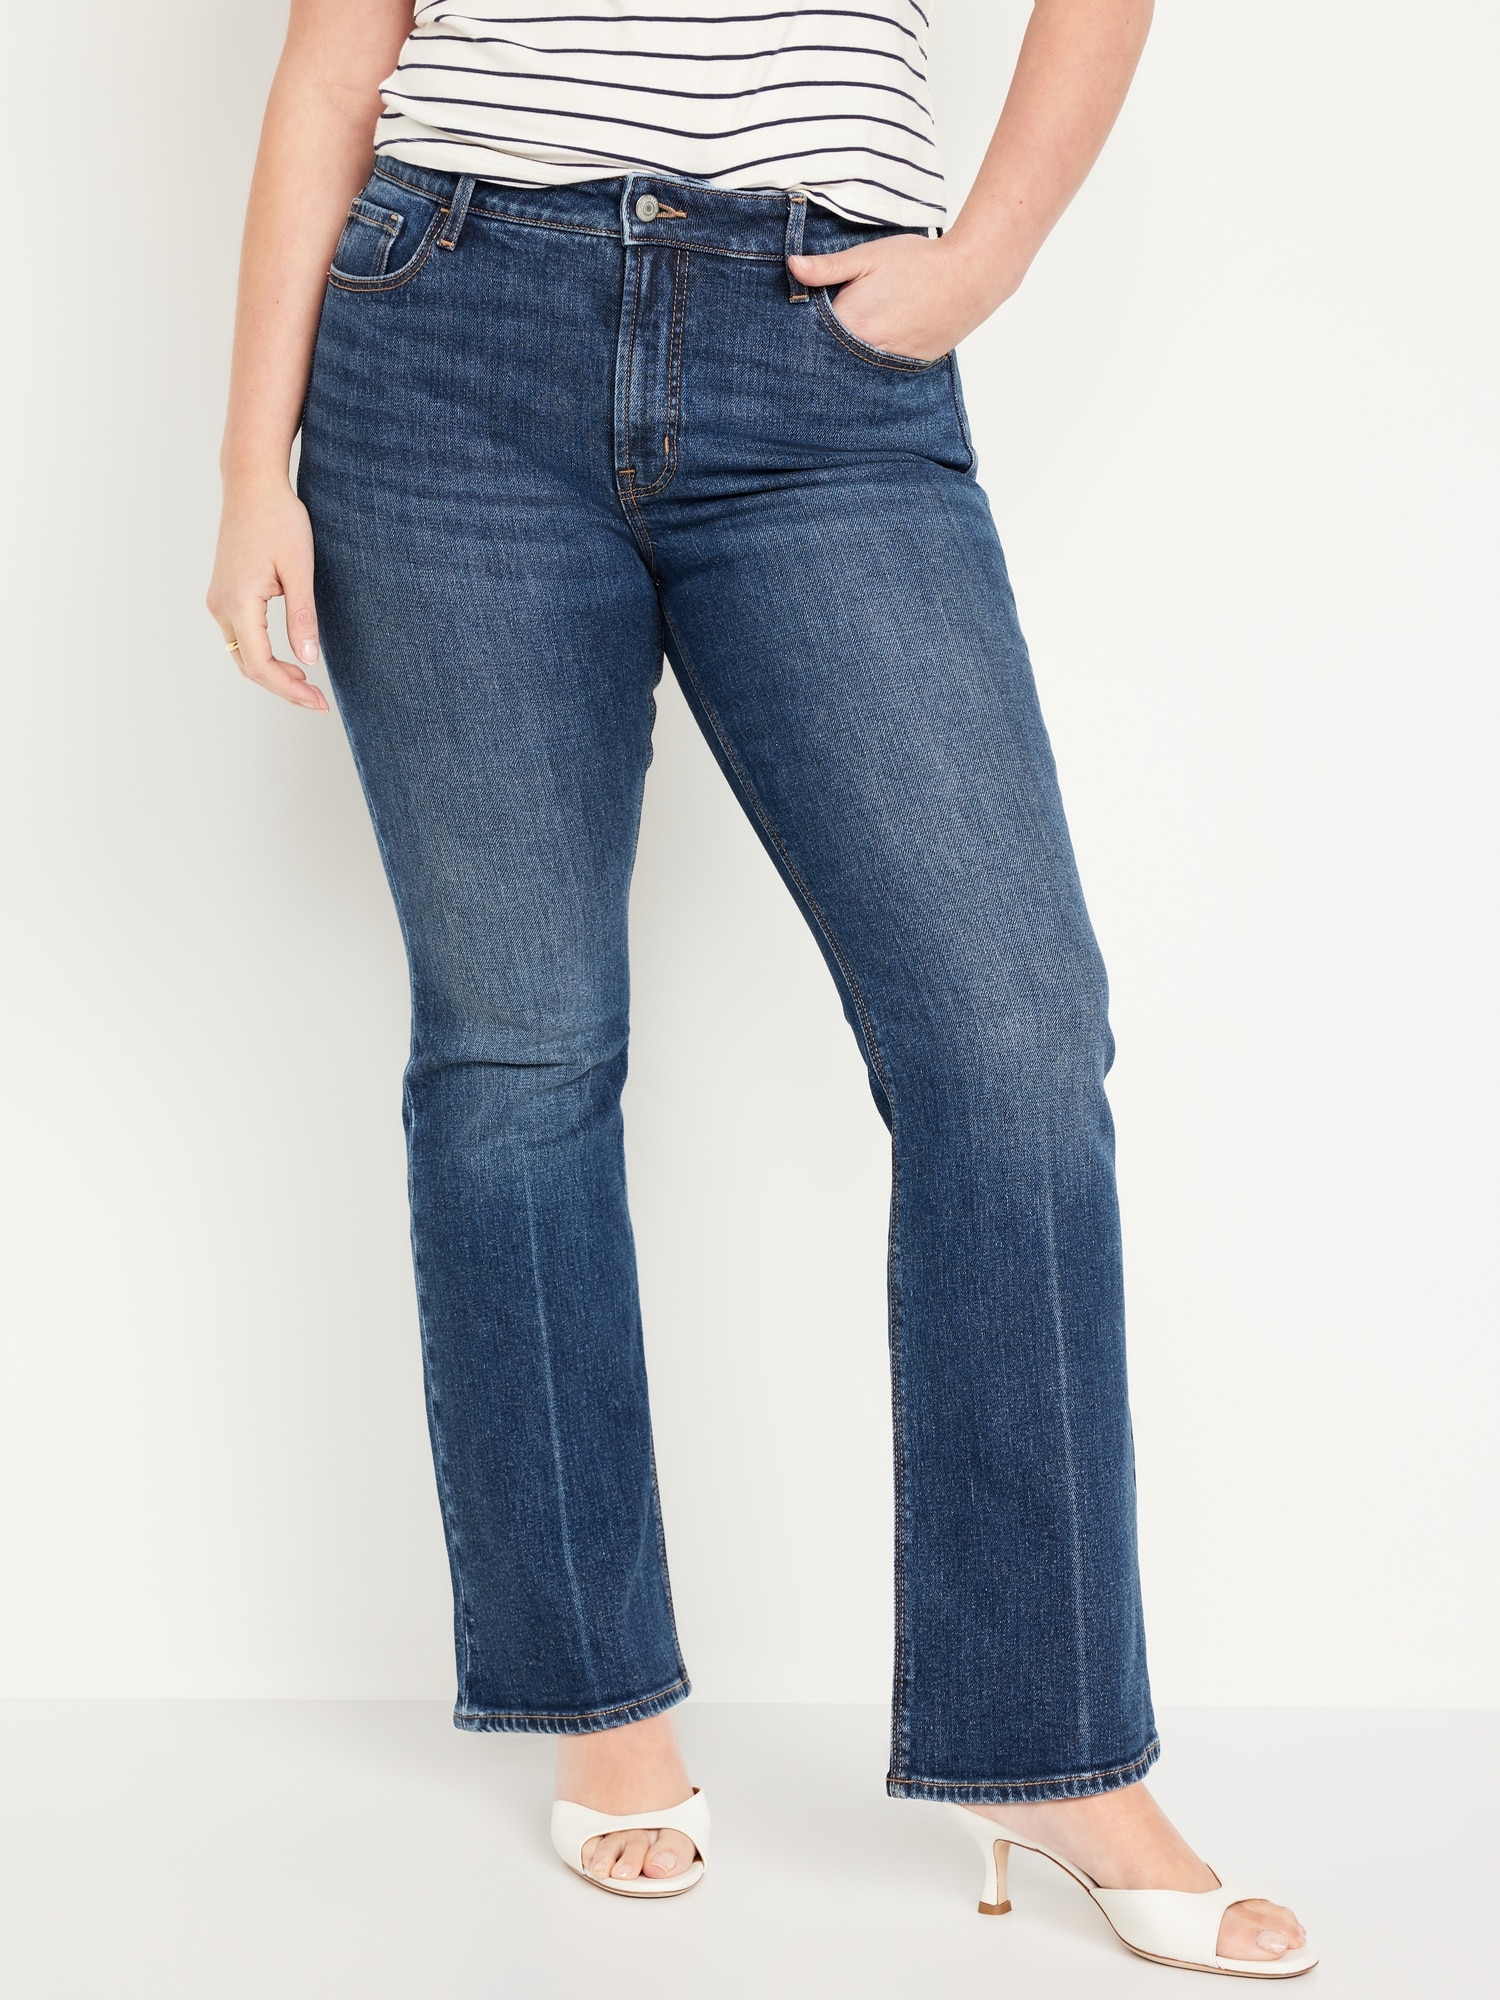 Extra High-Waisted Rockstar Flare Jeans for Women